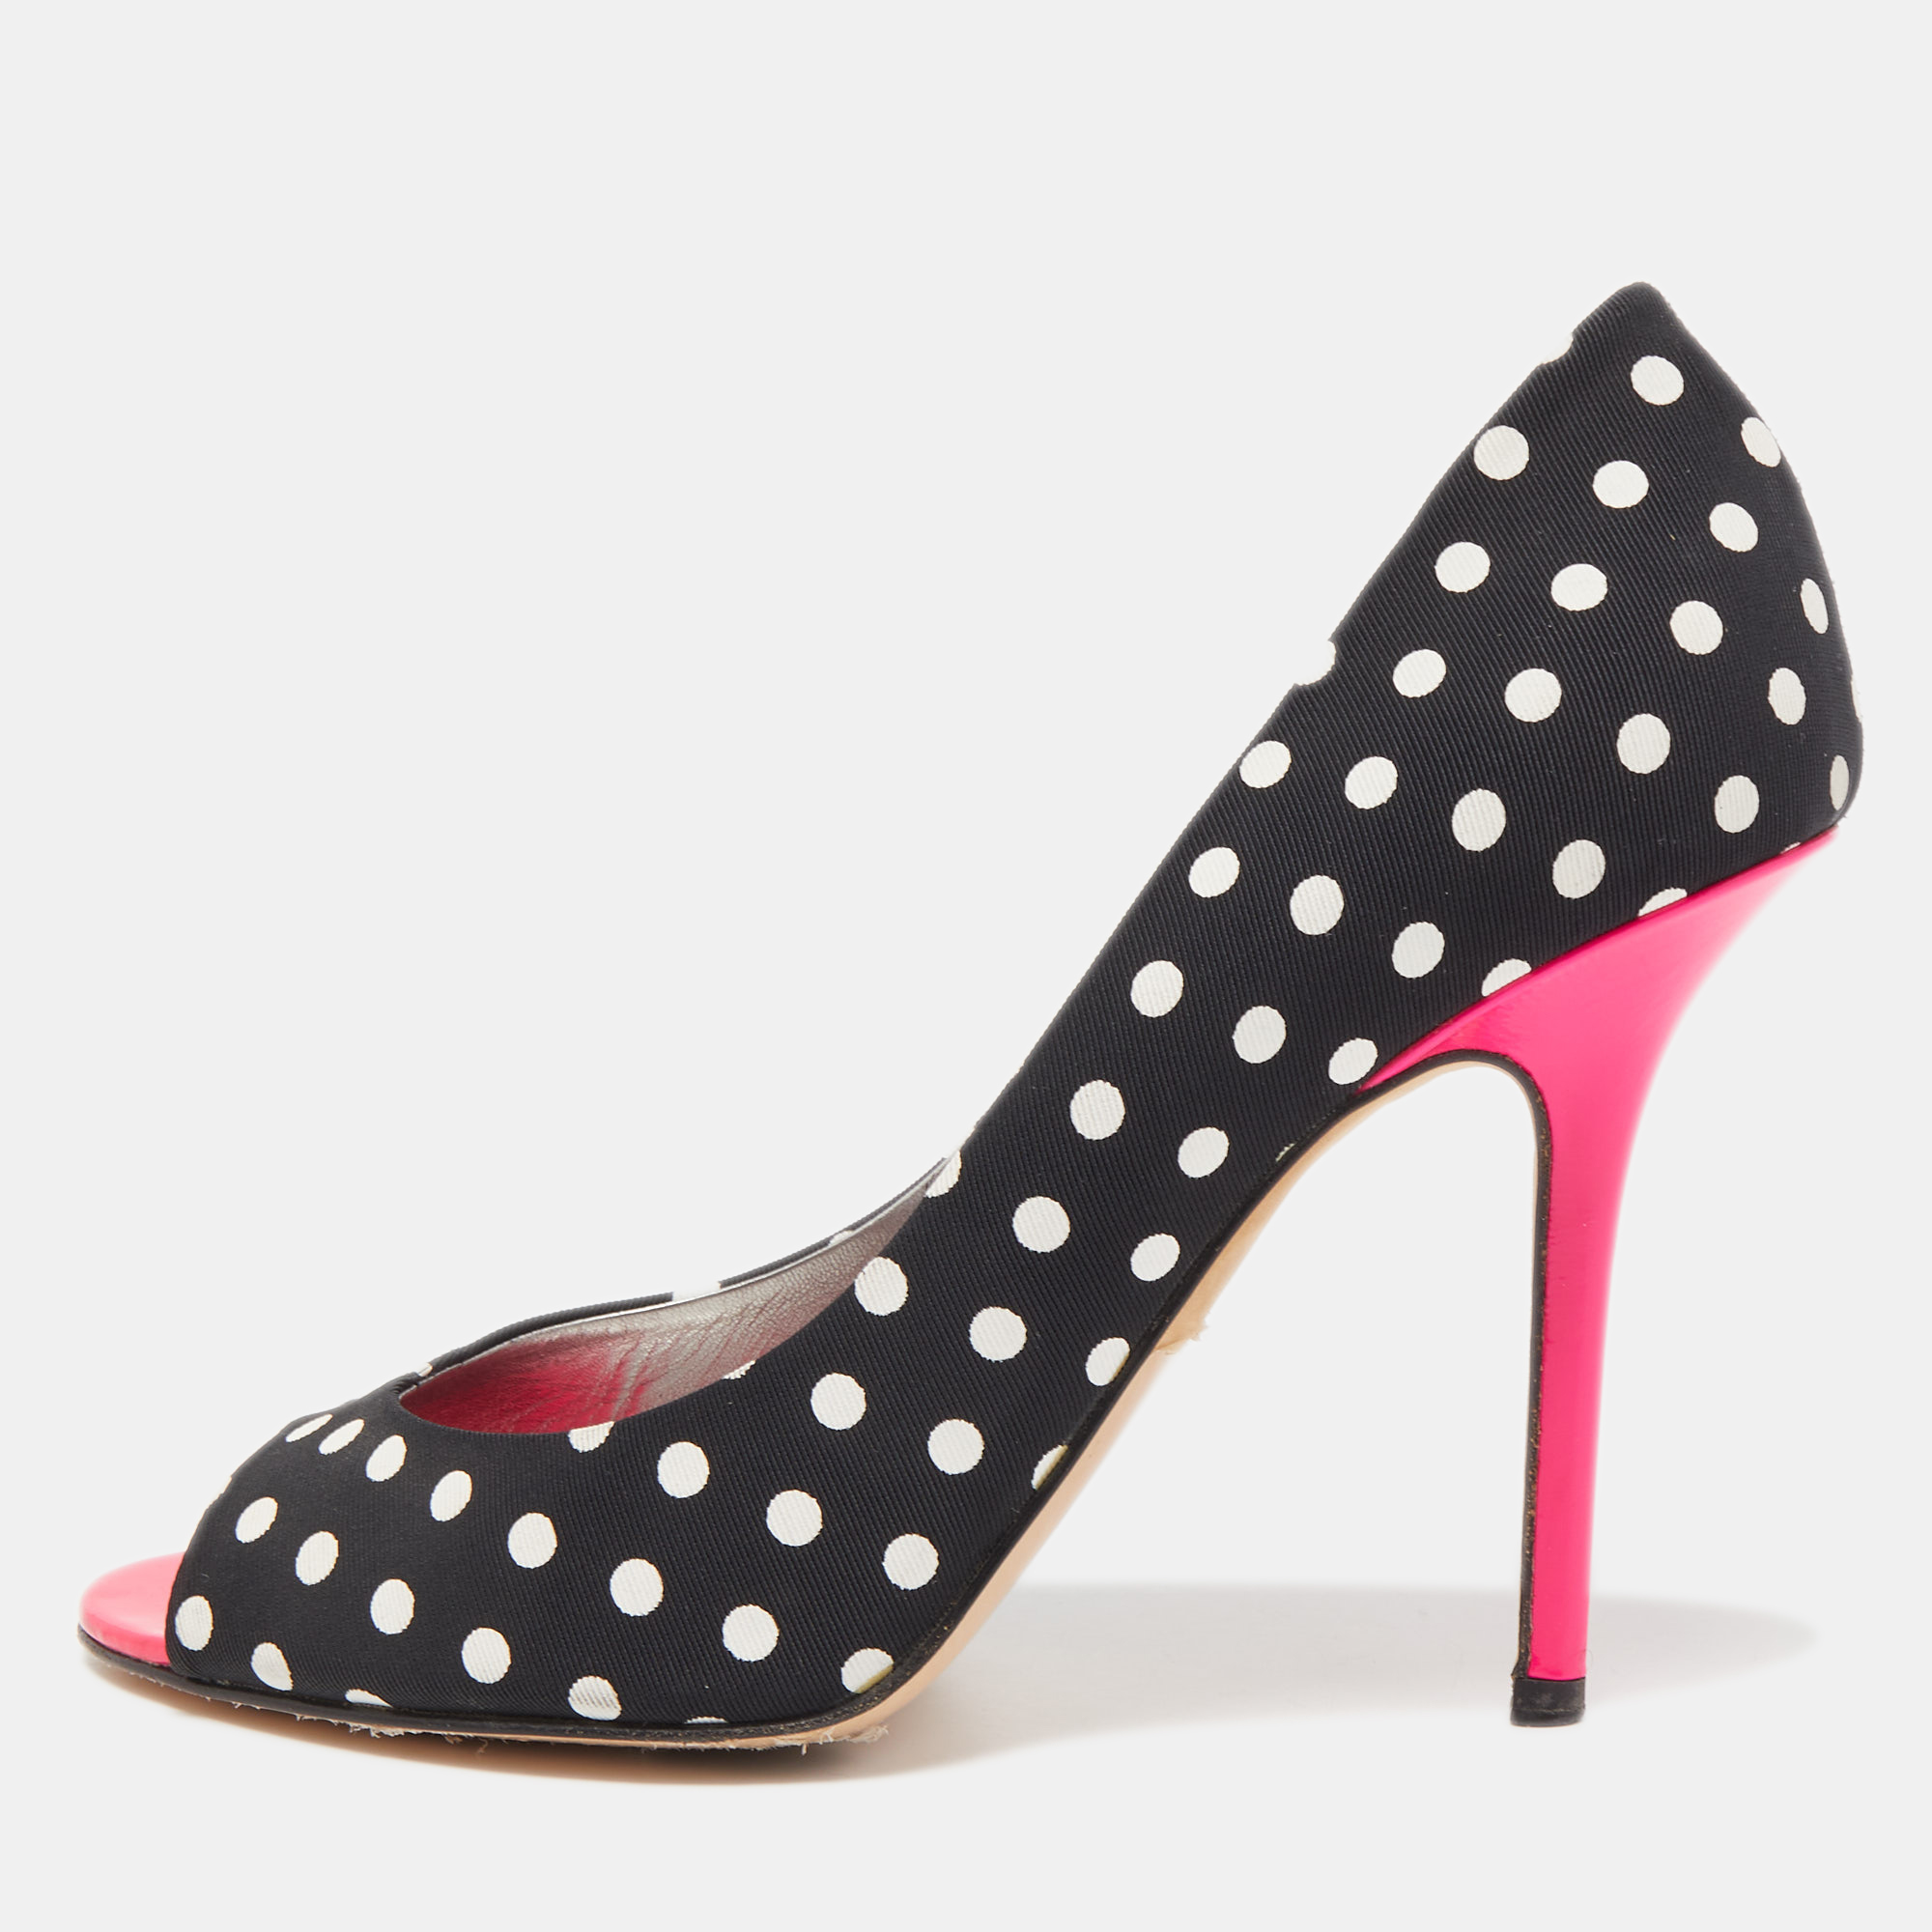 Ginas pumps are here to steal the limelight. Created using black white canvas these stunning pumps feature cute polka dotted prints throughout. They have peep toes and 11cm heels.